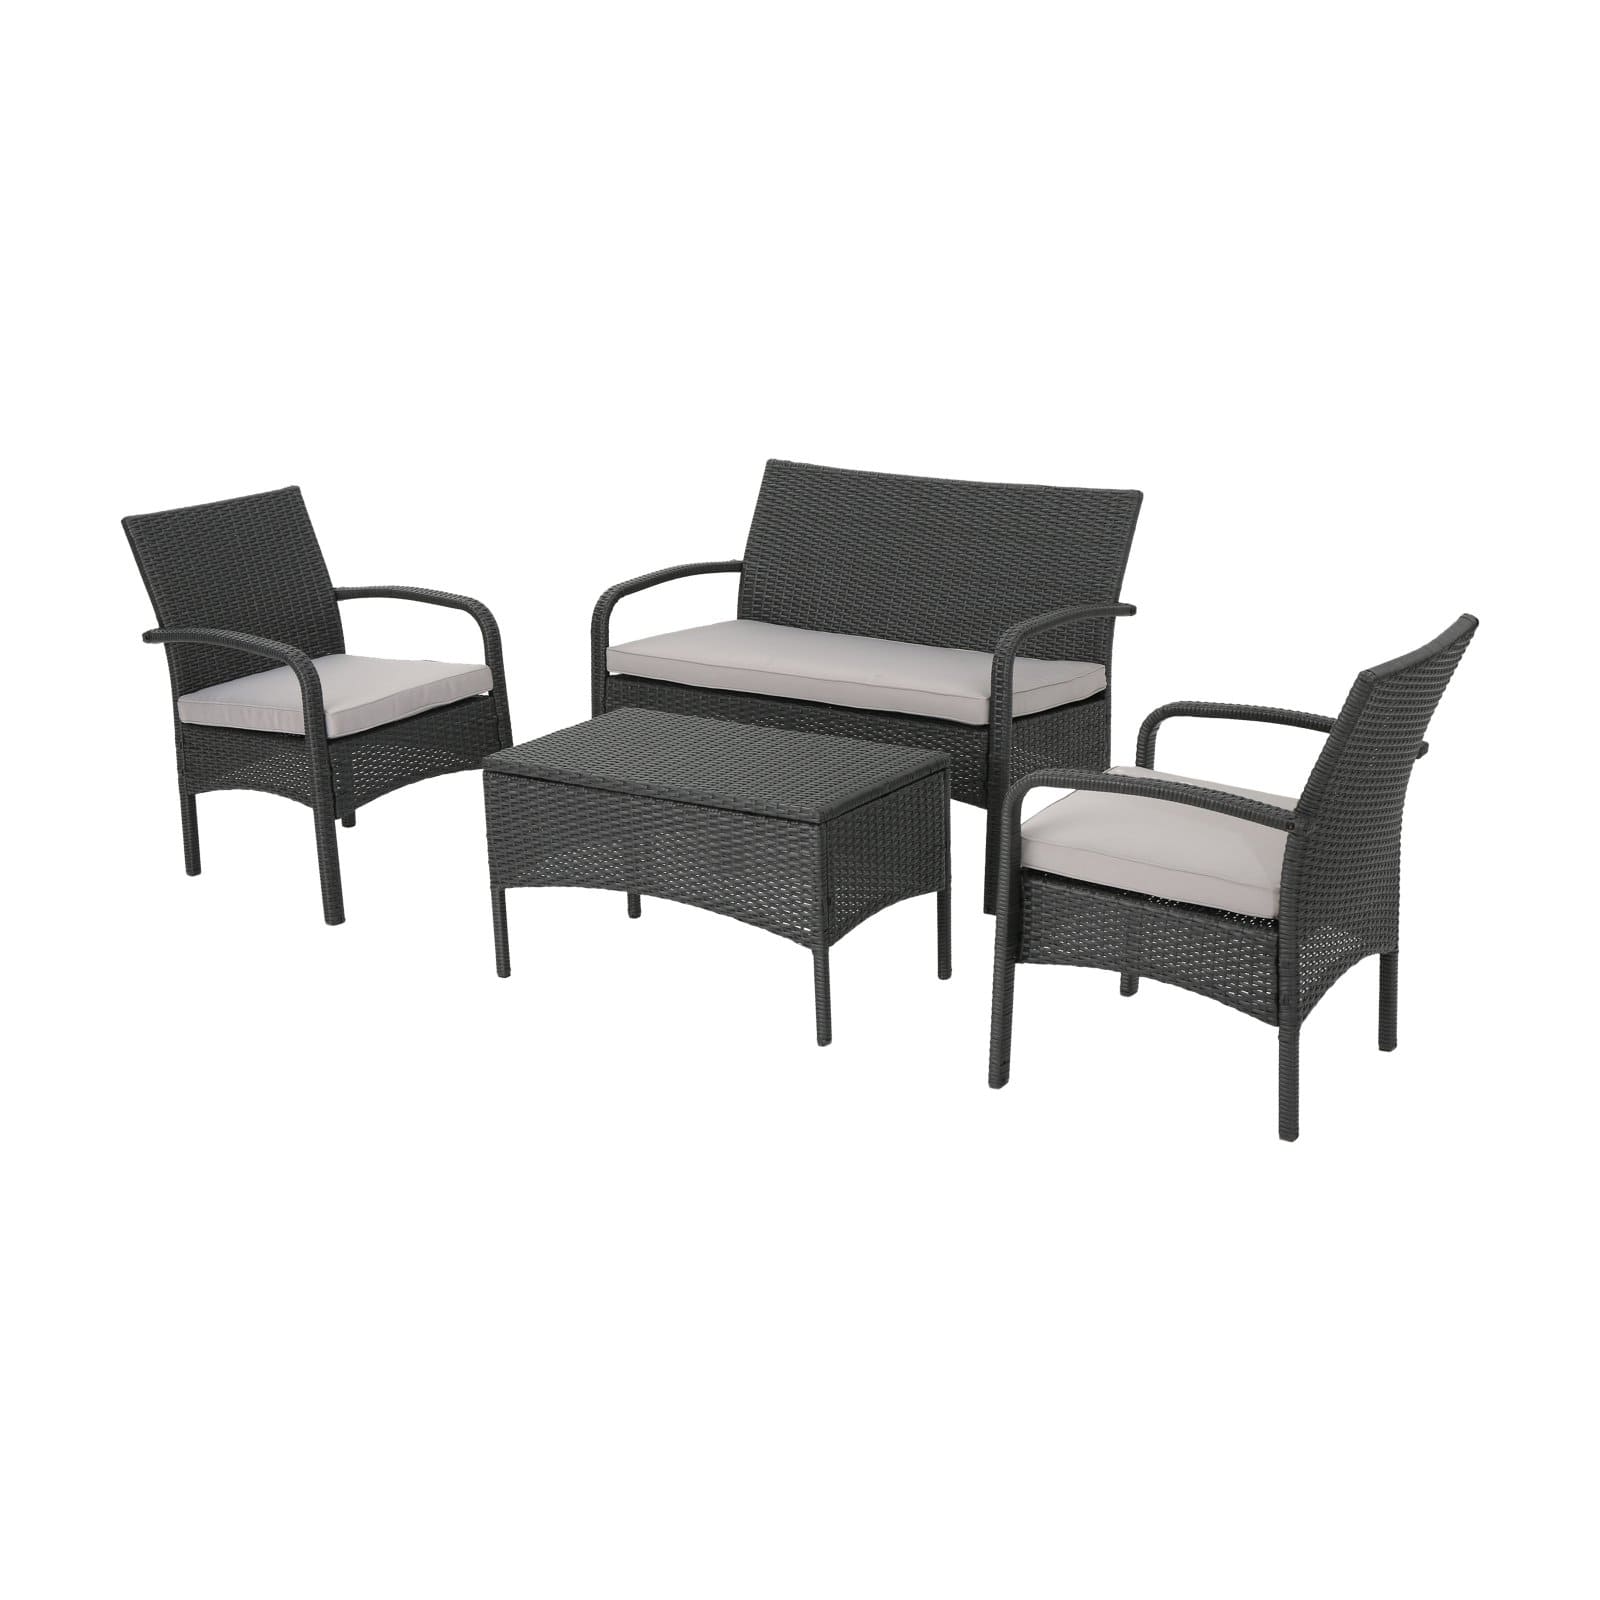 Christopher Knight Home Cordoba Outdoor Wicker 4-piece Conversation Set with Cushions by  Gray + Light Gray - image 2 of 11